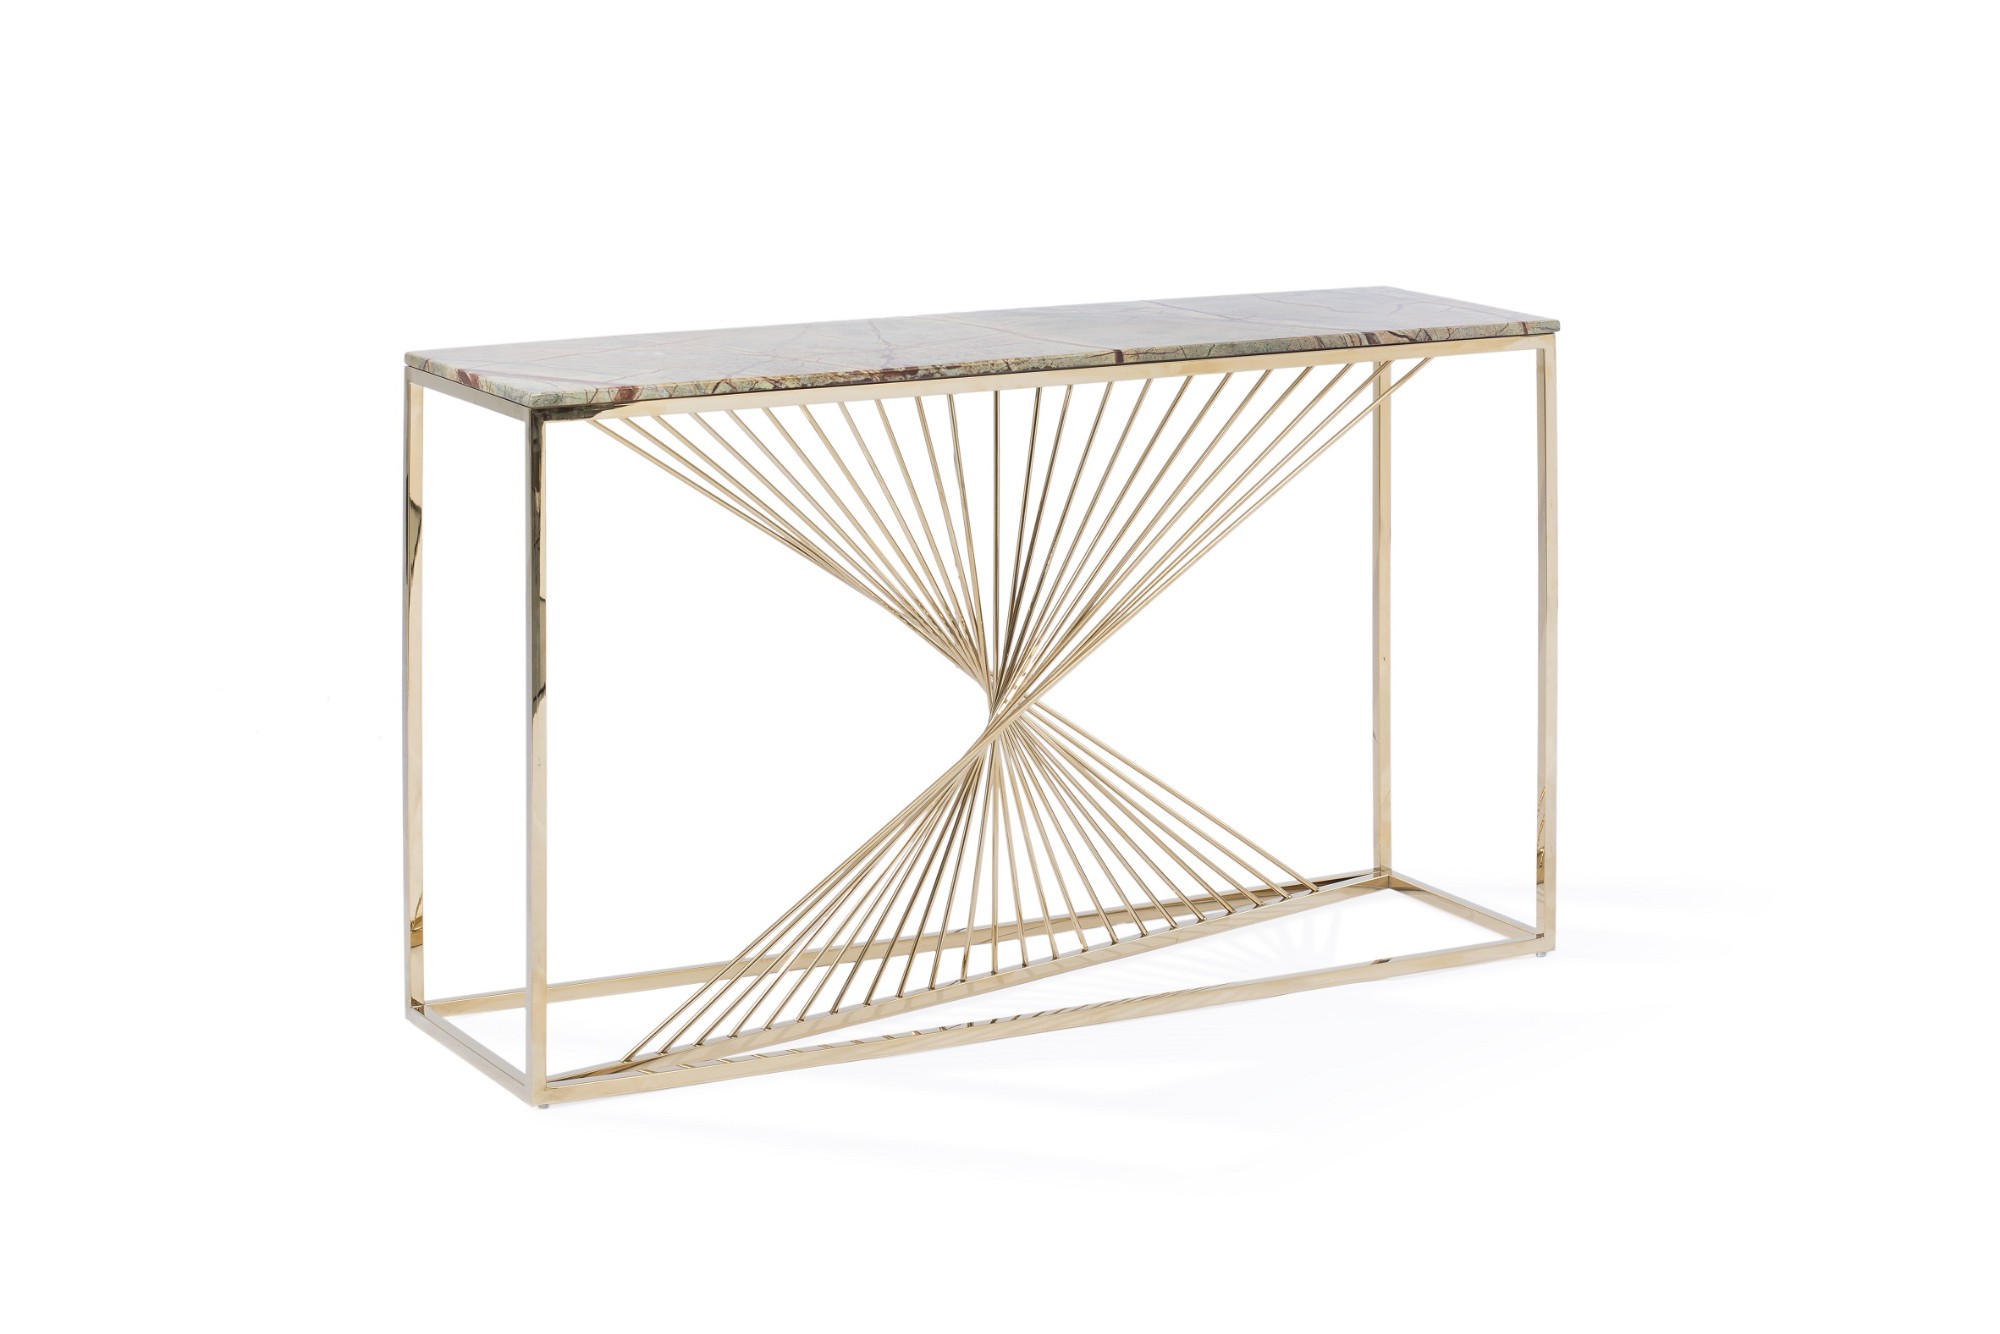 Bespoke gold stainless steel console table